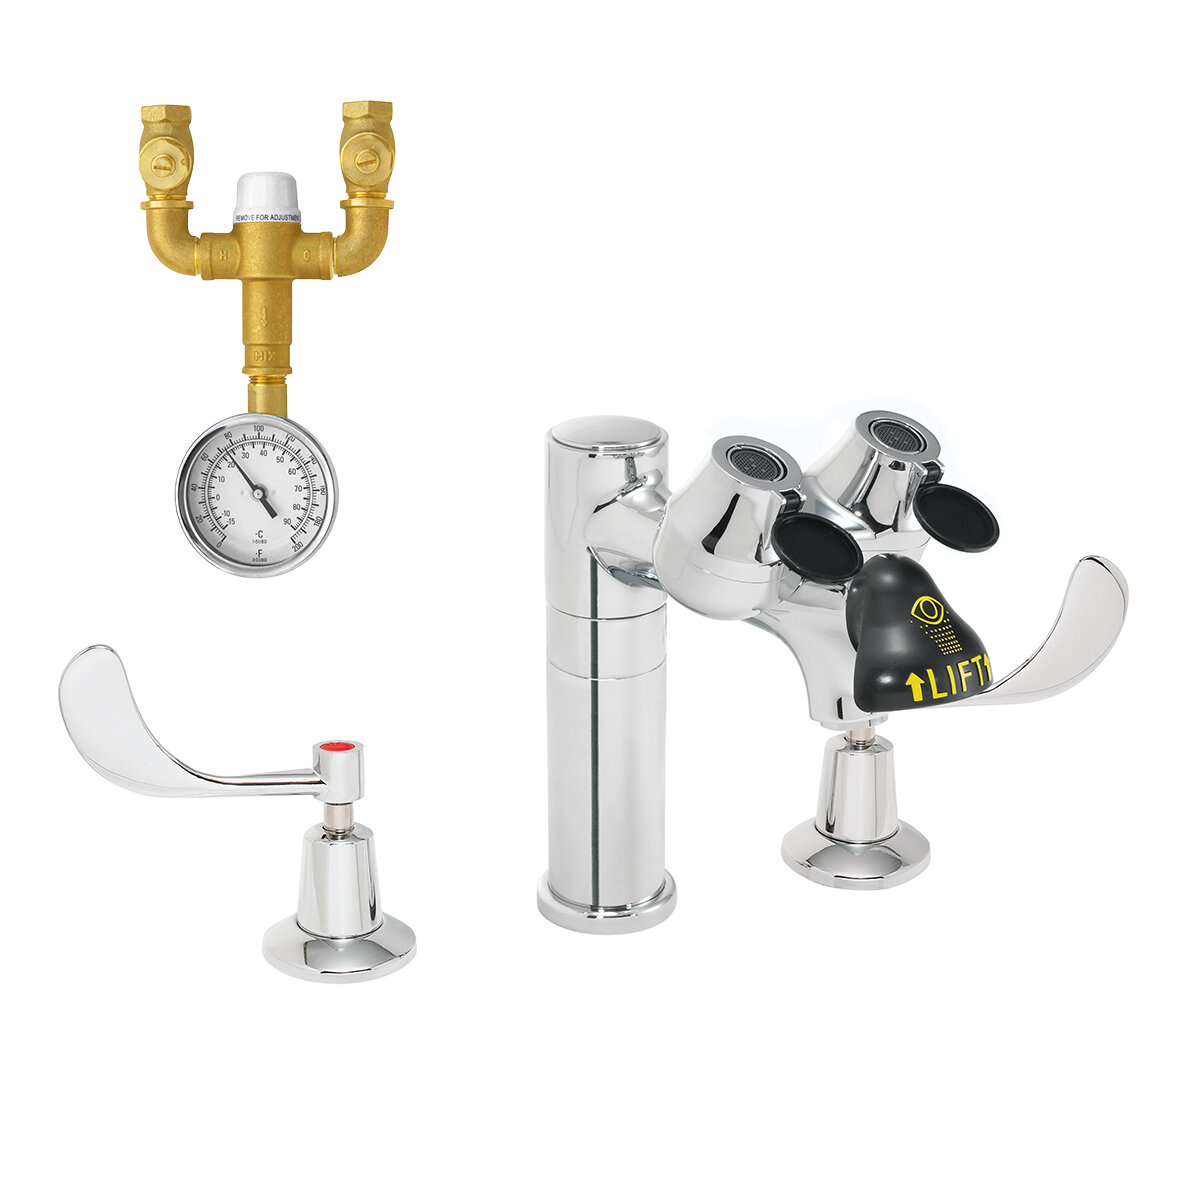 Speakman Eyesaver Laboratory Faucet With Integrated Emergency